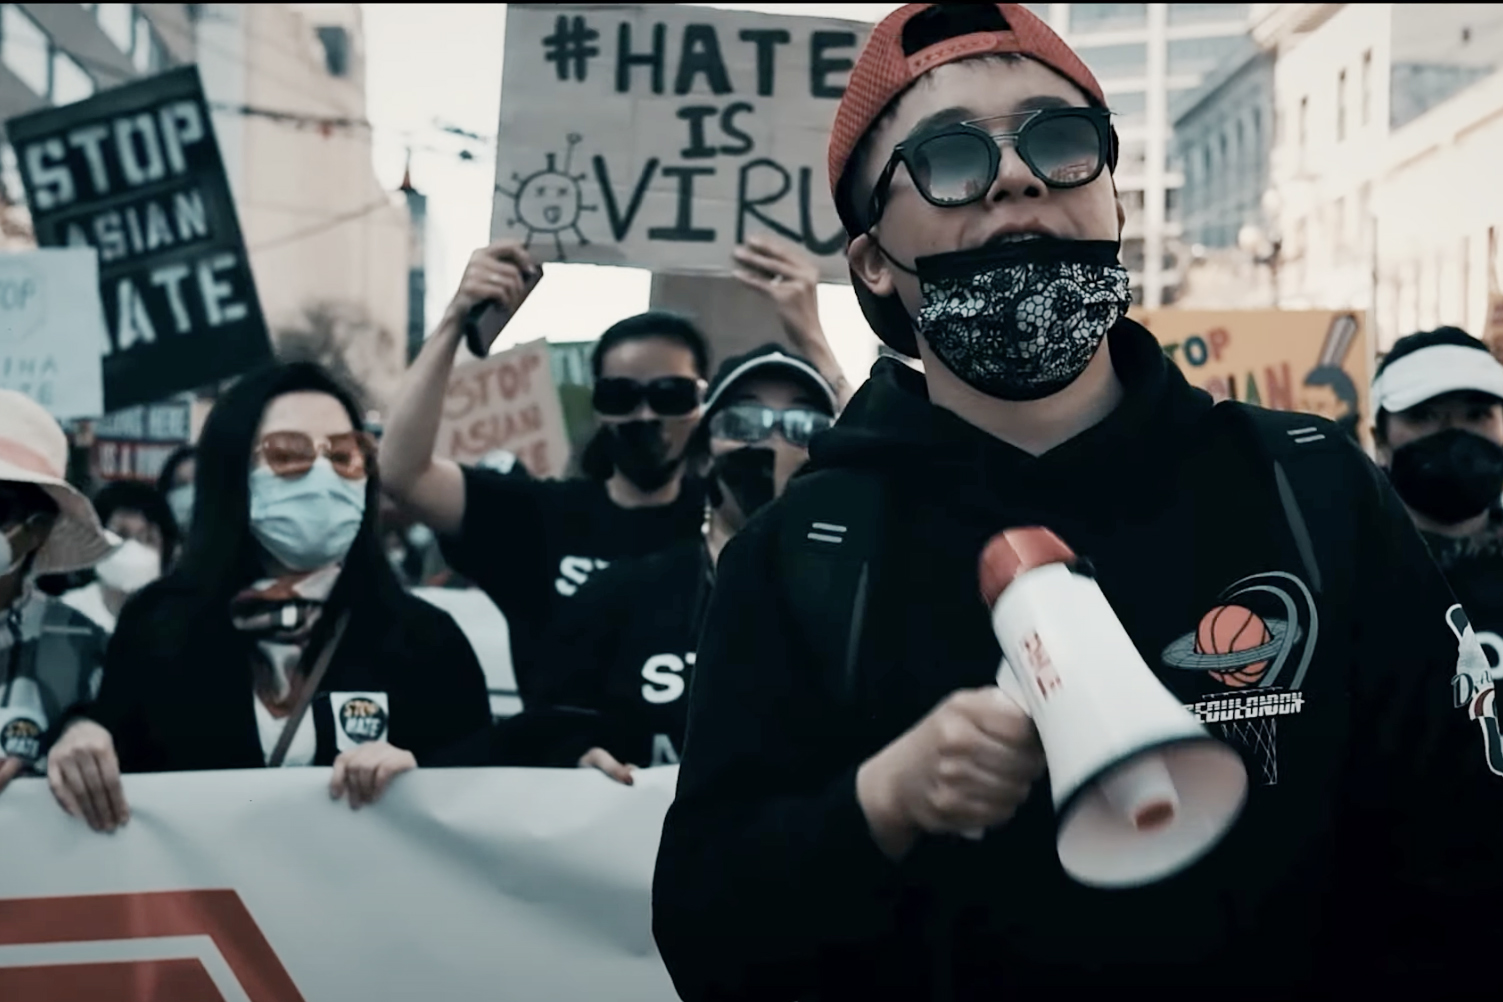 A man with a mace mask holds a bullhorn during a “Stop Asian Hate” demonstration.